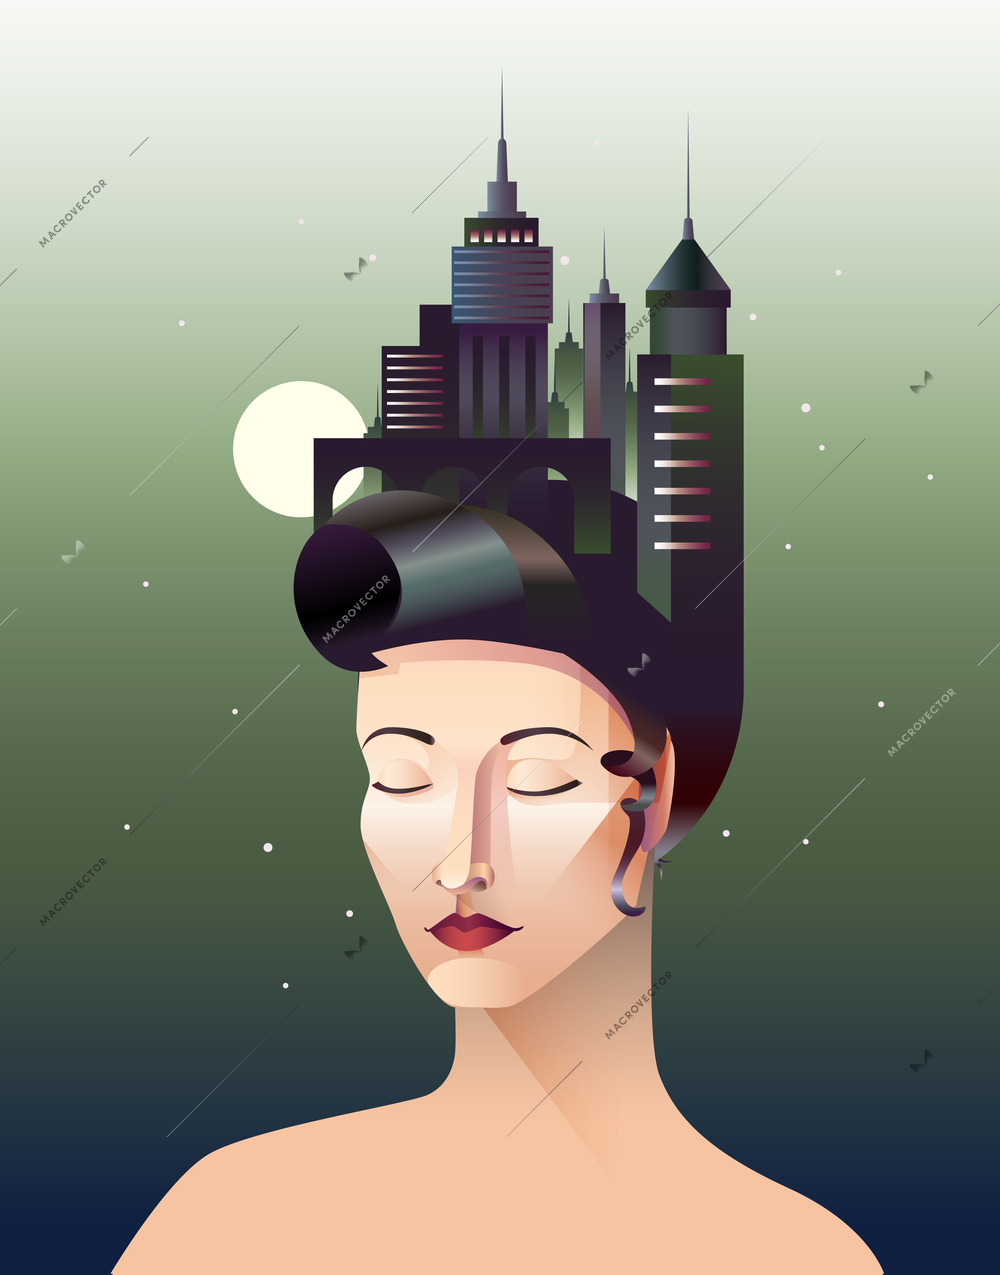 Miss geometry abstract portrait of woman with closed eyes and hair consisted of elements of different geometrical forms at night sea background vector illustration